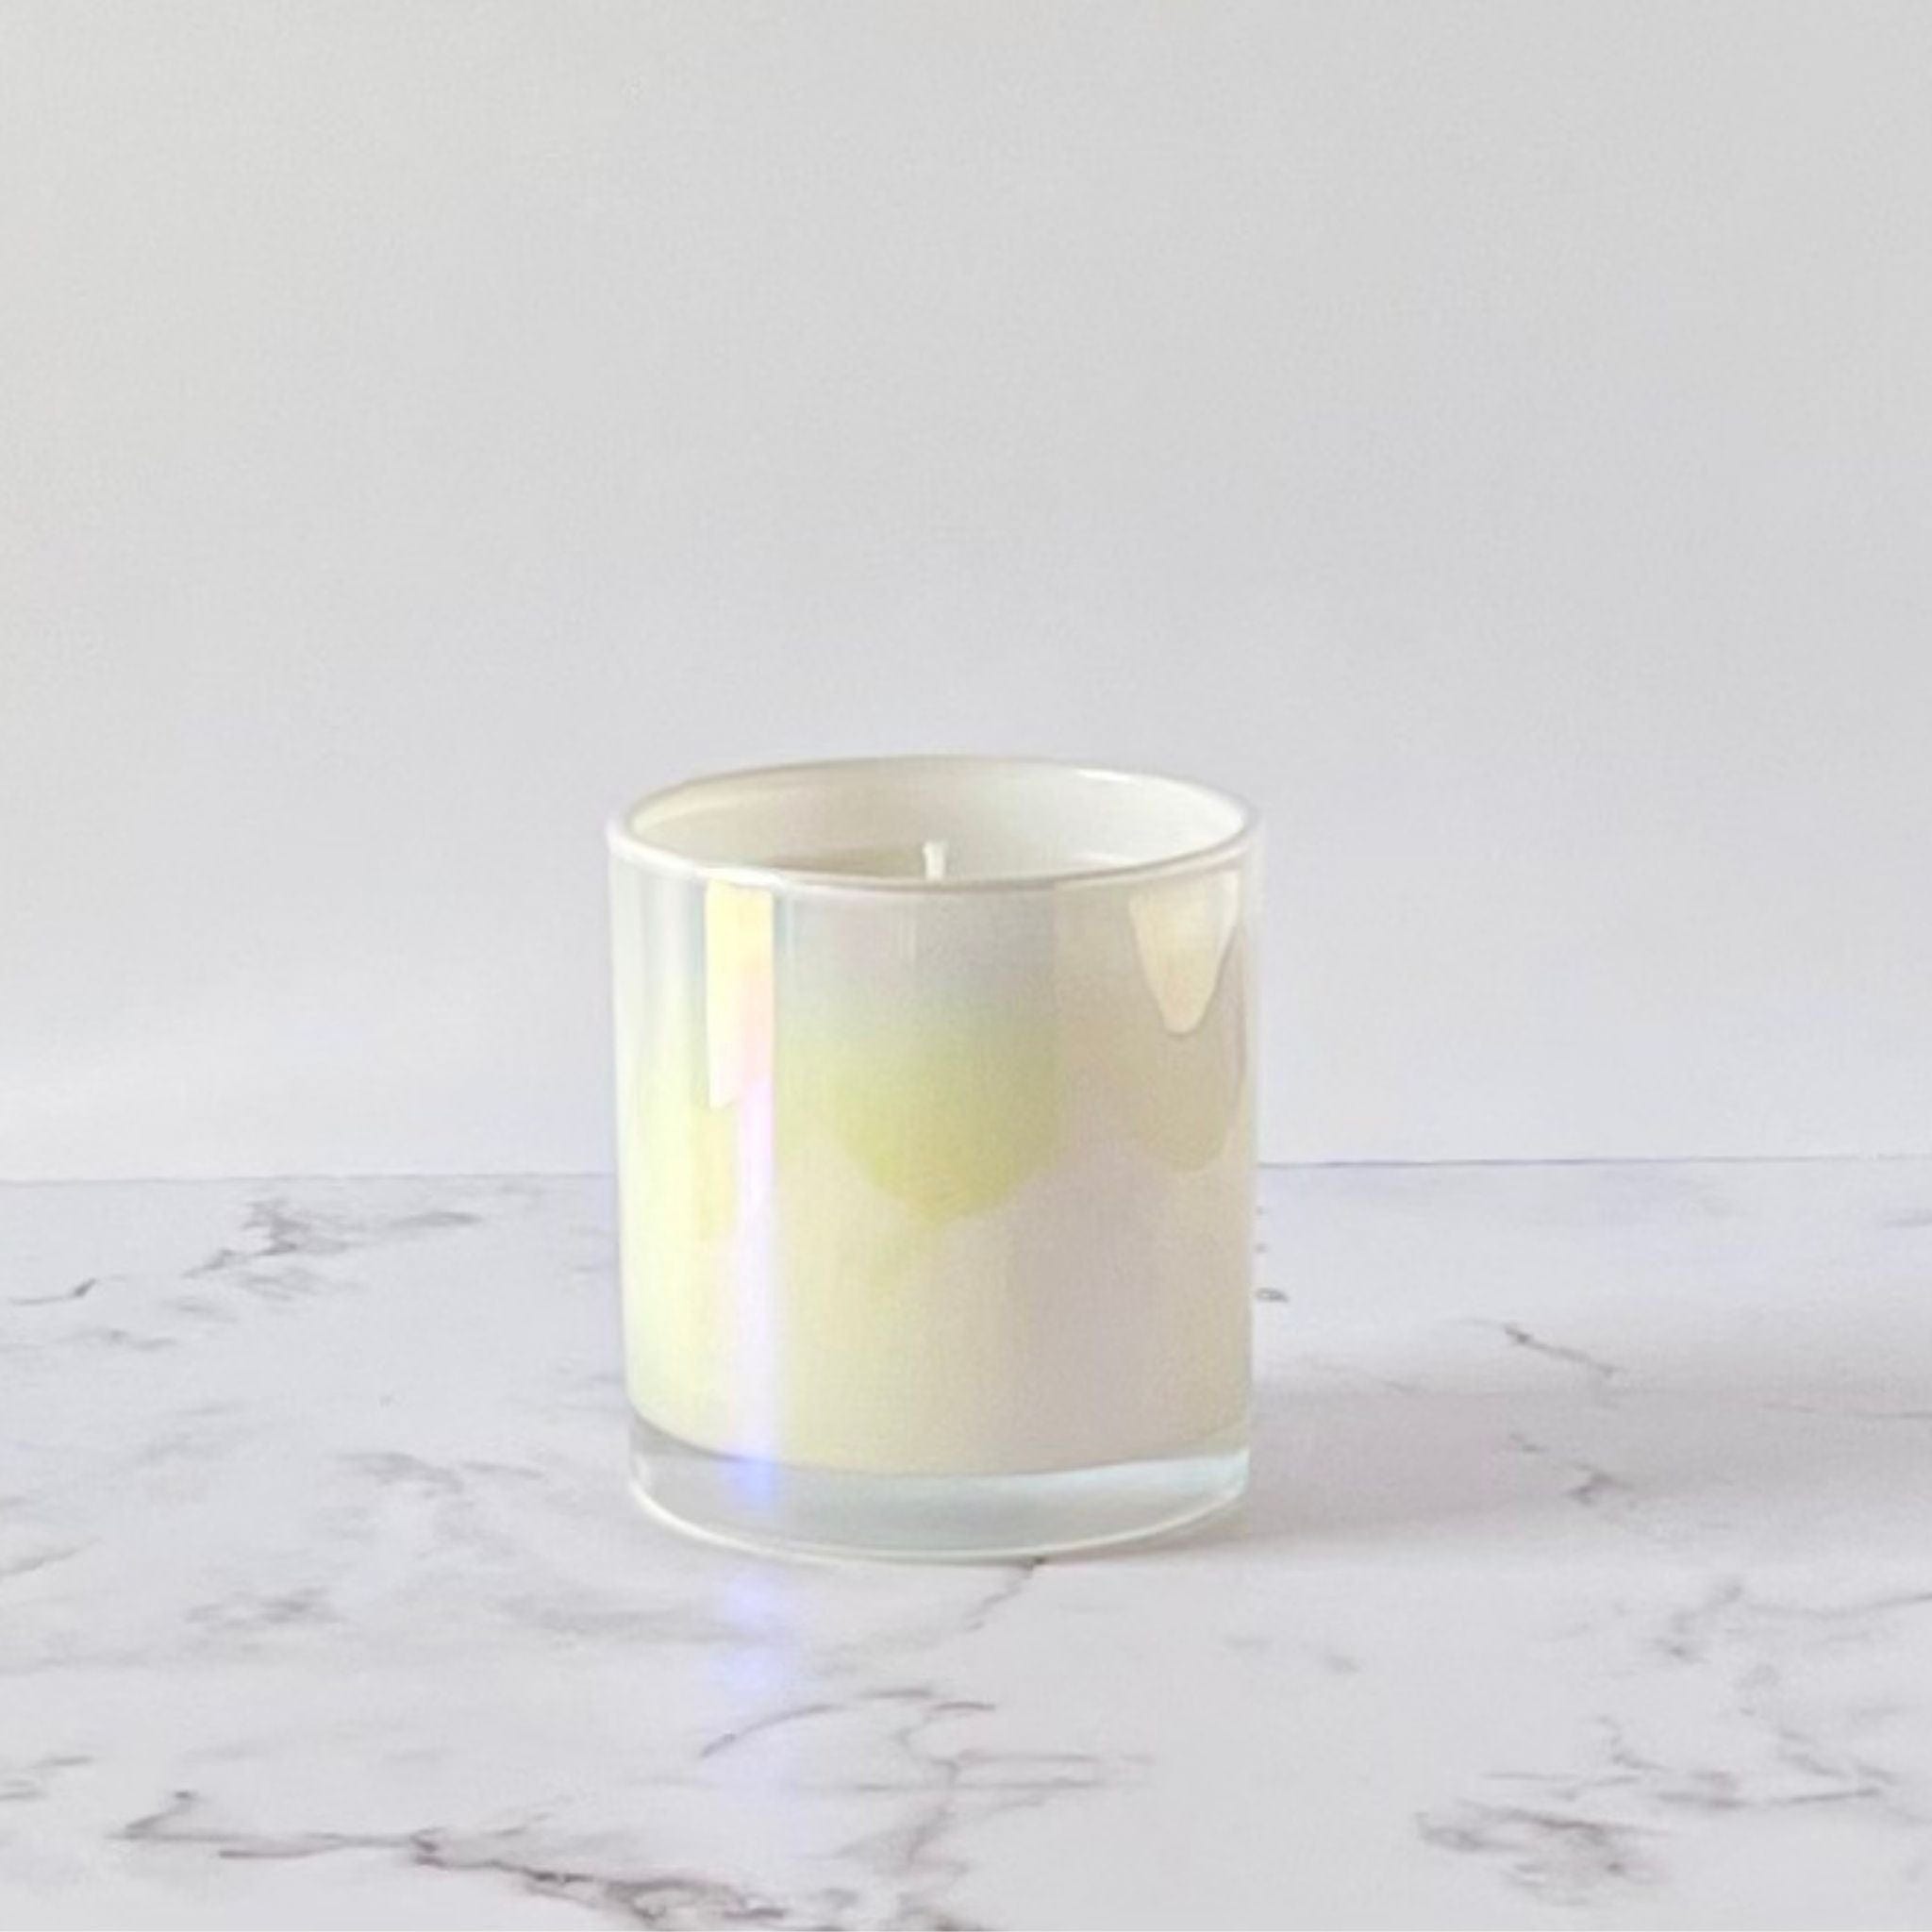 Private Label Candles by Velavida Candles 9 Oz Pearl Iridescent Wholesale candles in bulk